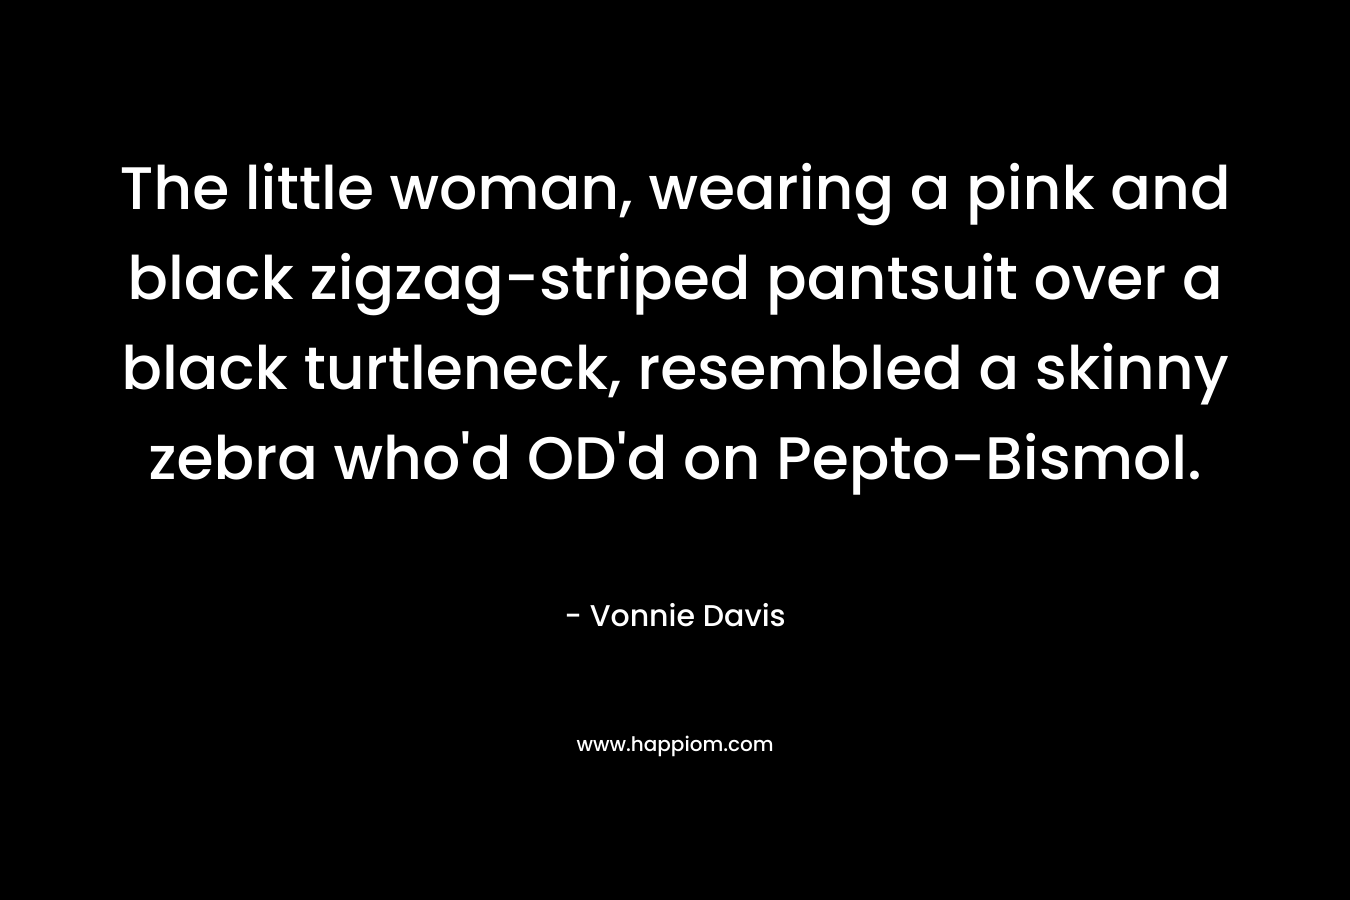 The little woman, wearing a pink and black zigzag-striped pantsuit over a black turtleneck, resembled a skinny zebra who’d OD’d on Pepto-Bismol. – Vonnie Davis